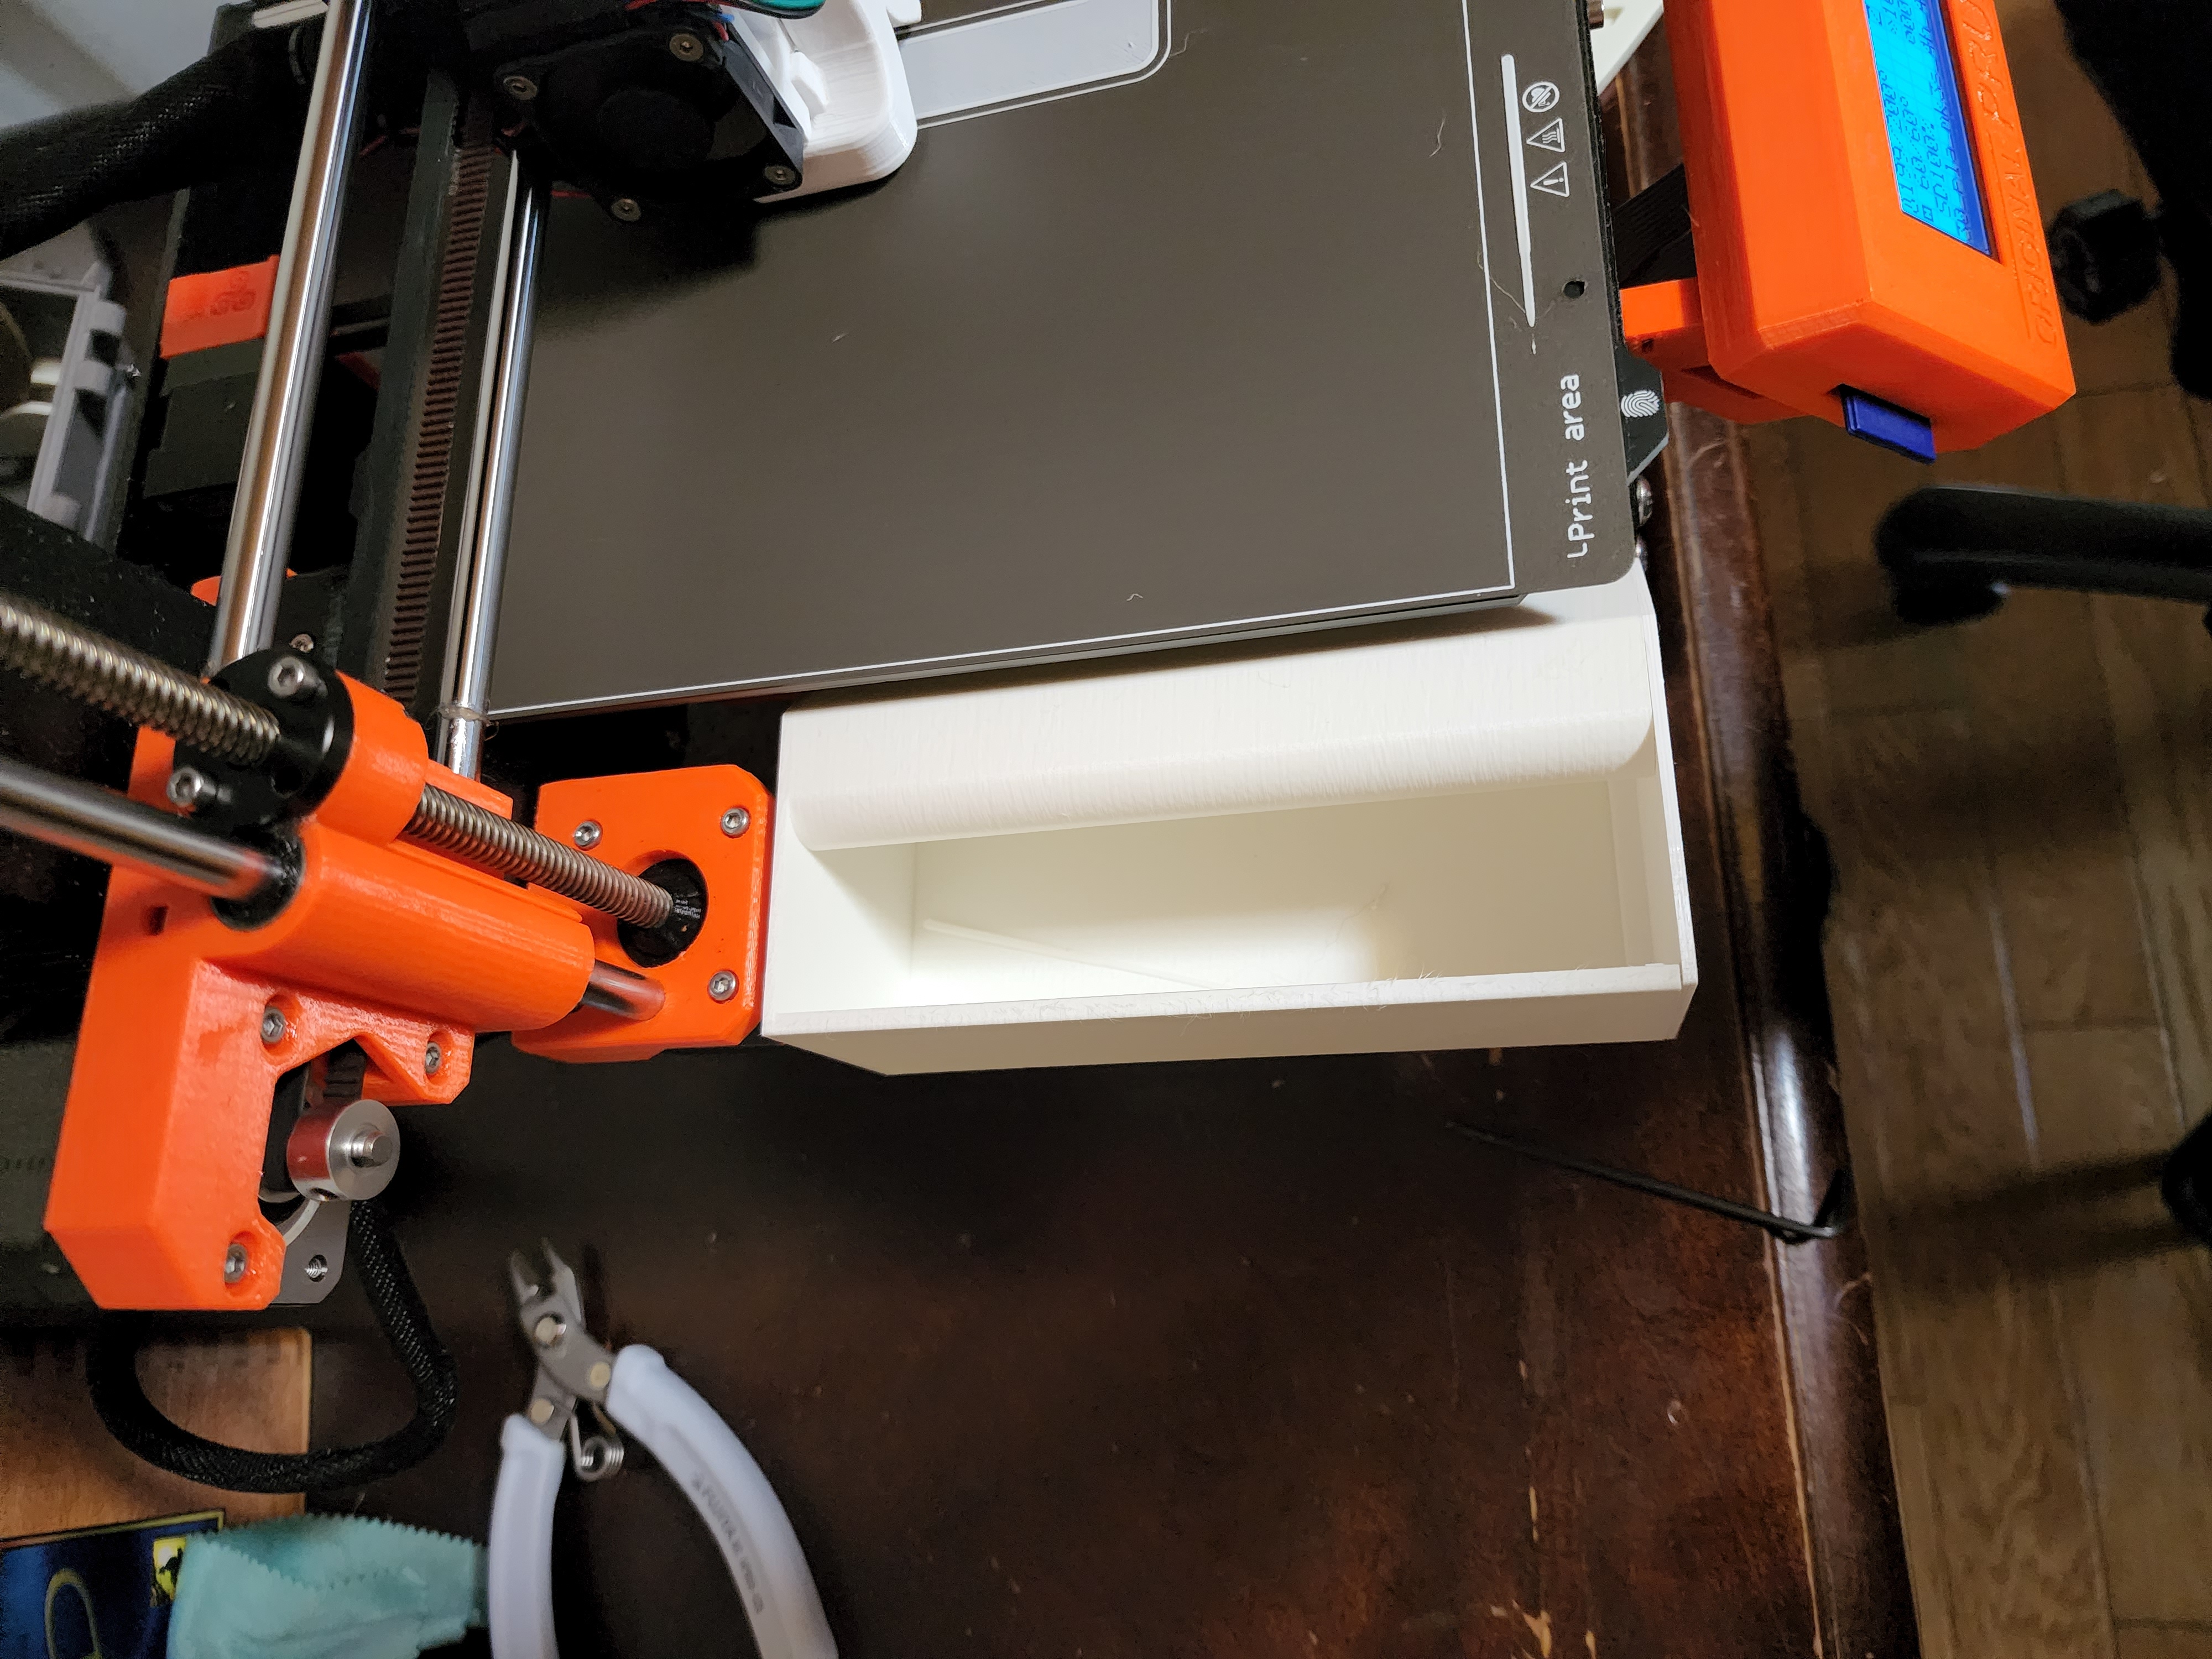 Easy Off Waste Bin for Prusa i3 (Now 2020 extrusion compatible)